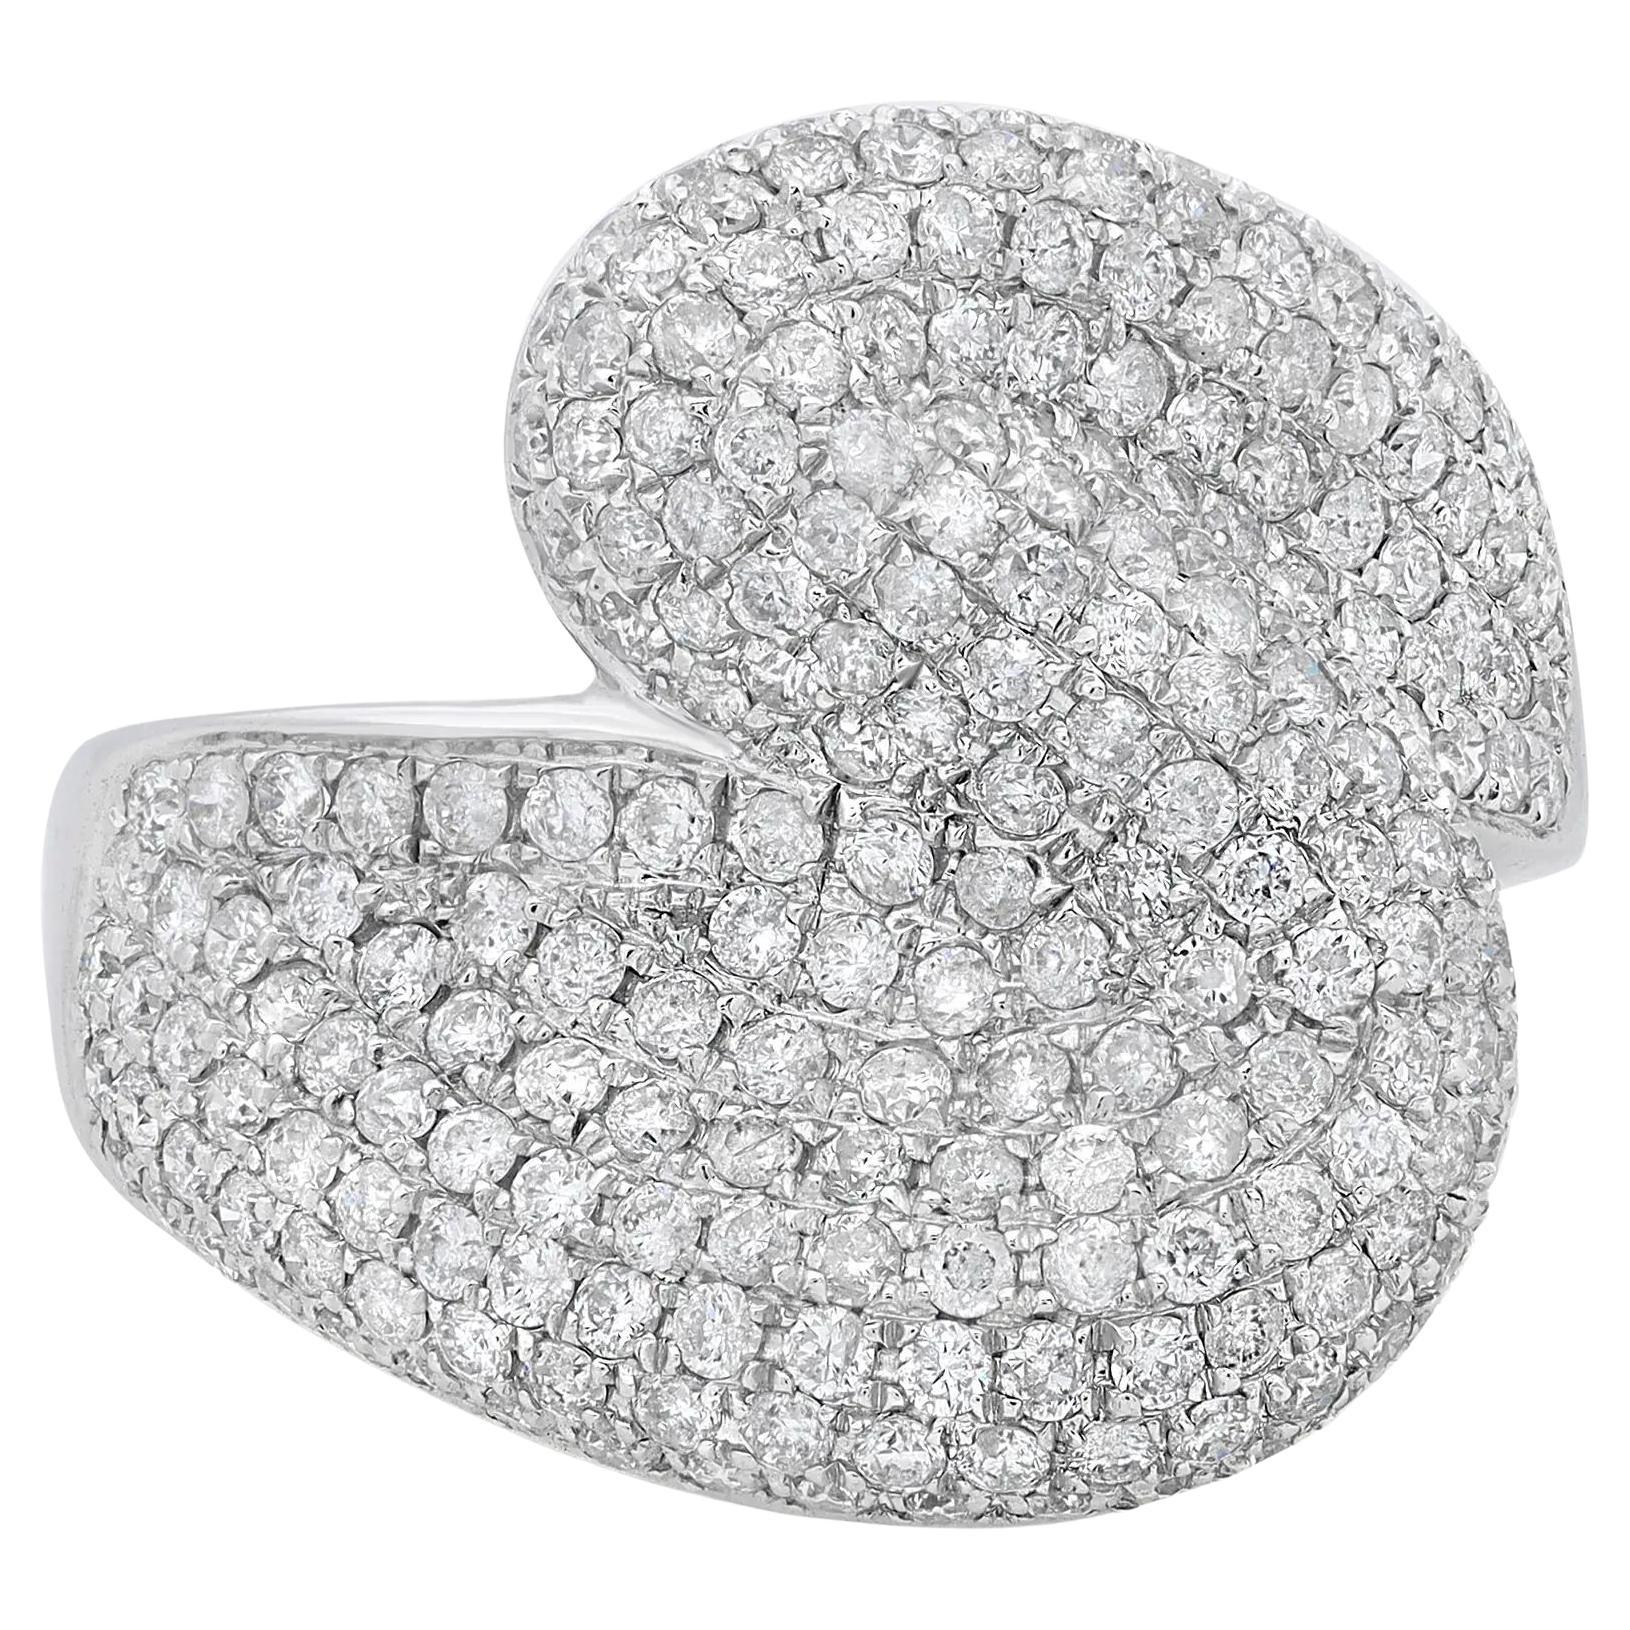 2.14cttw Pave Set Round Cut Diamond Ladies Cocktail Ring 14k White Gold For Sale